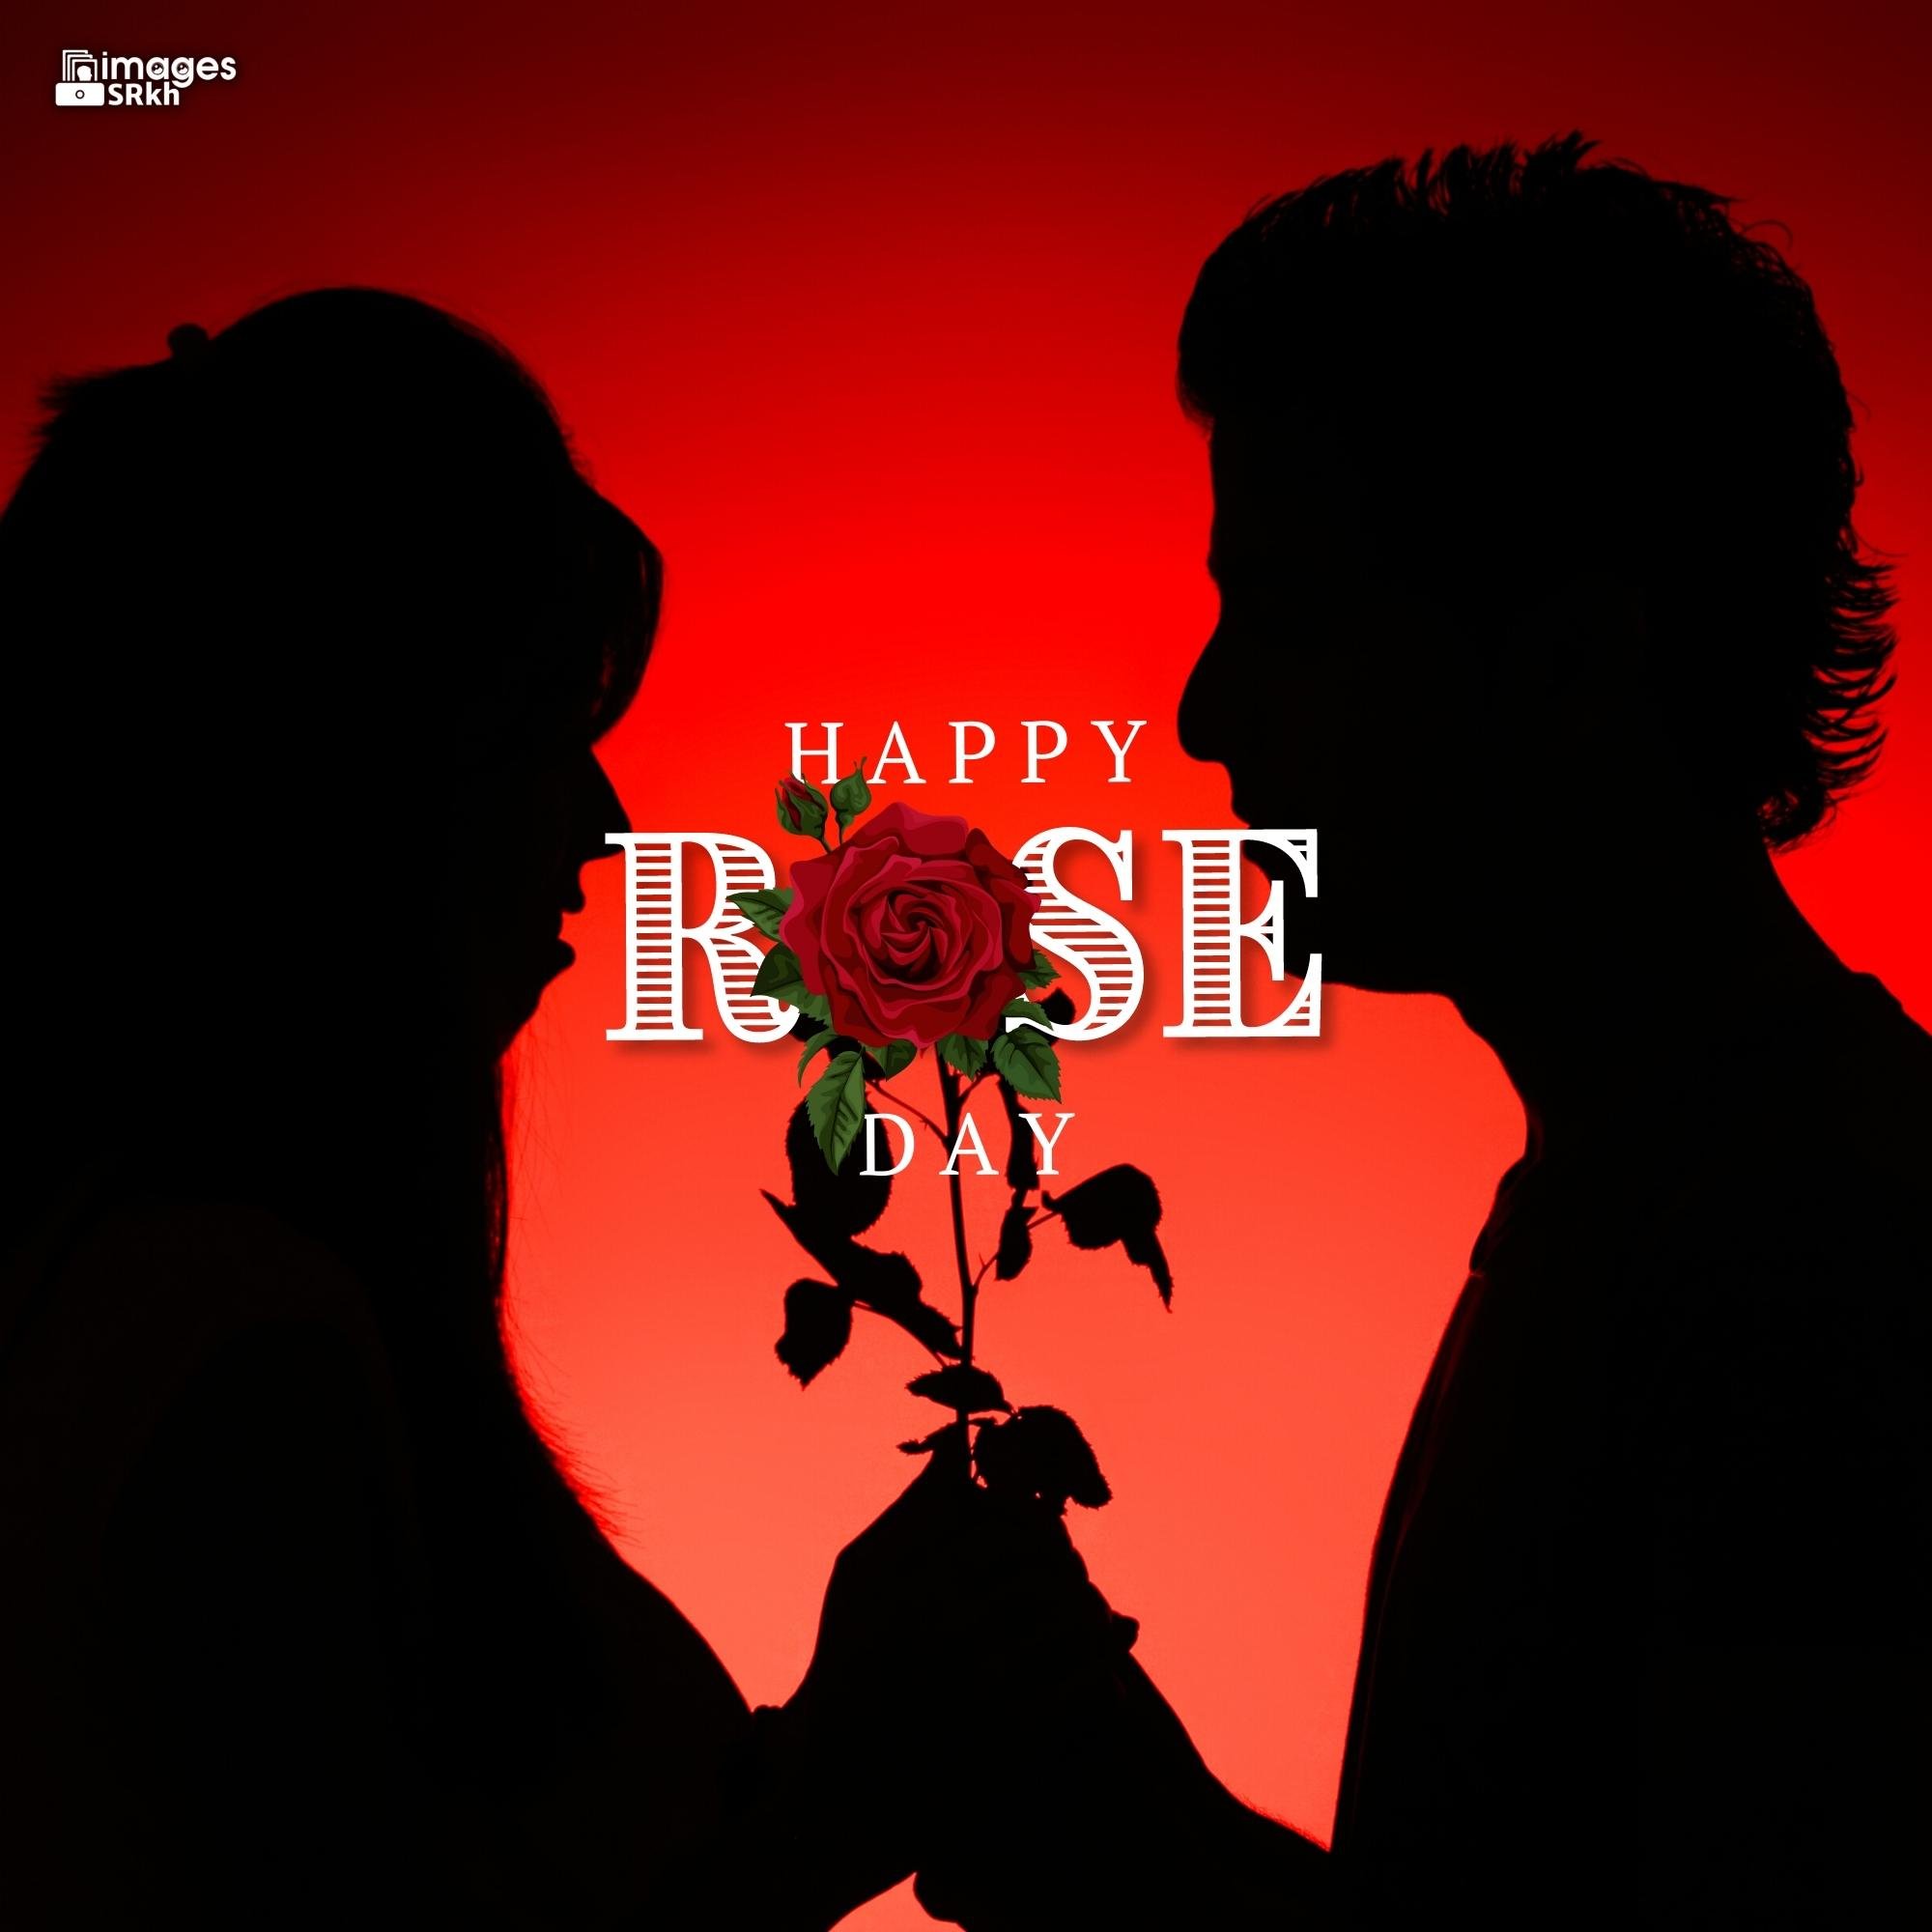 Romantic Rose Day Images Hd Download (39)